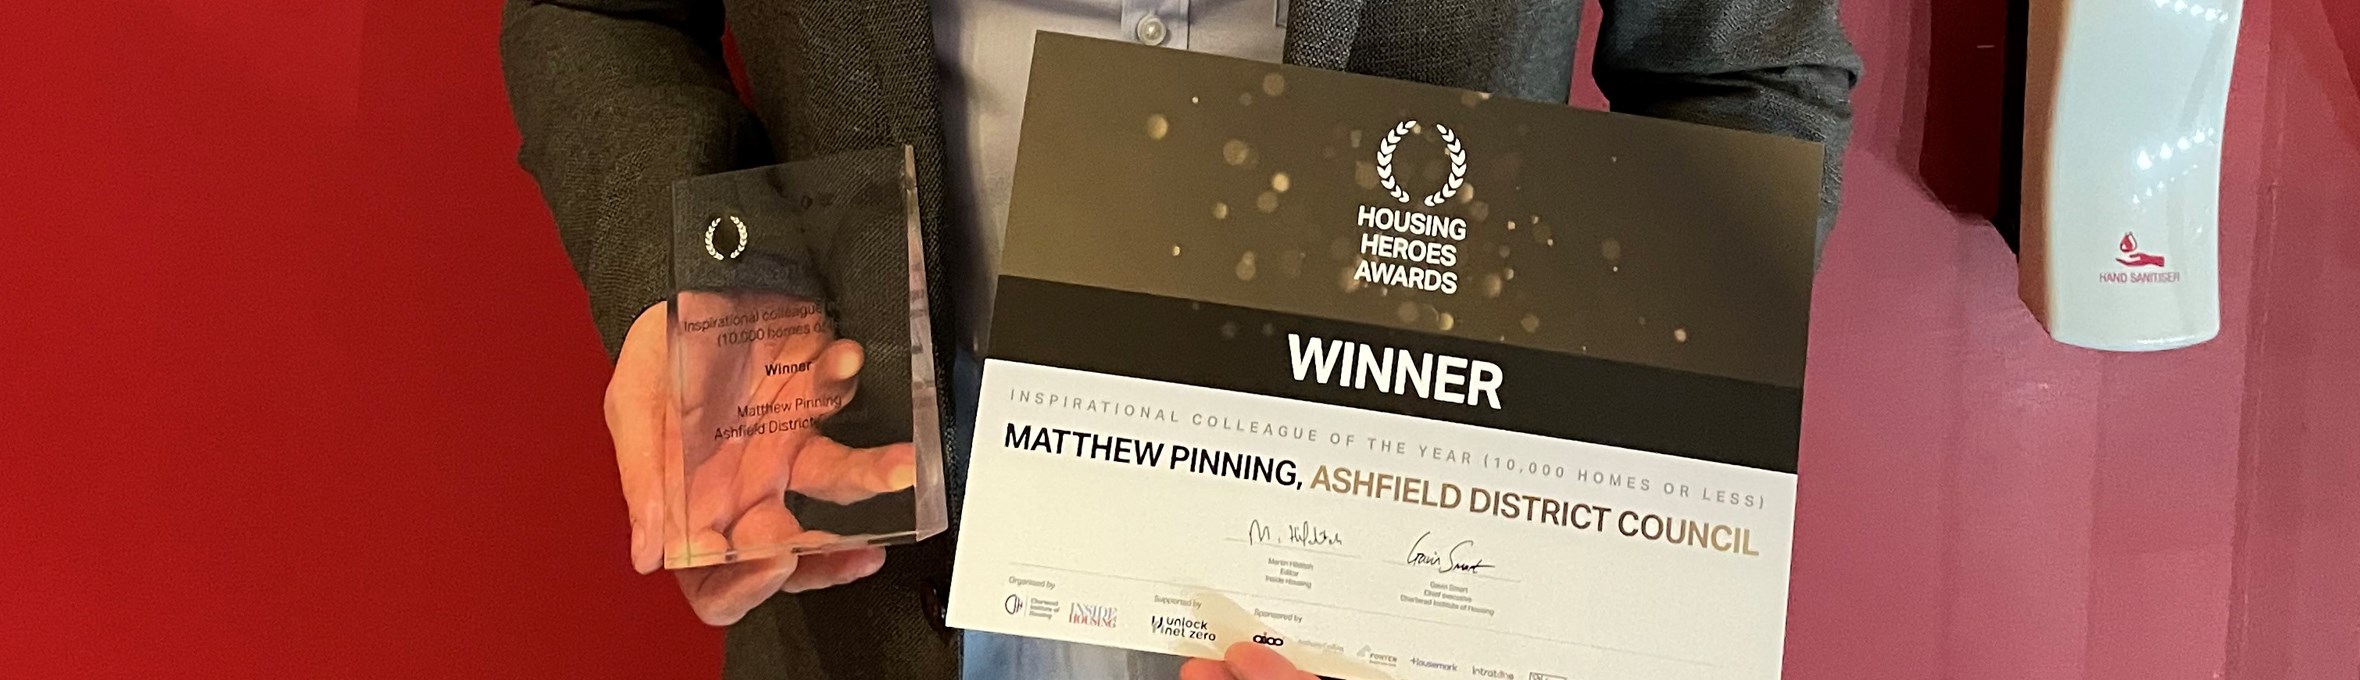 Matthew Pinning smiling holding his award in front of a red wall